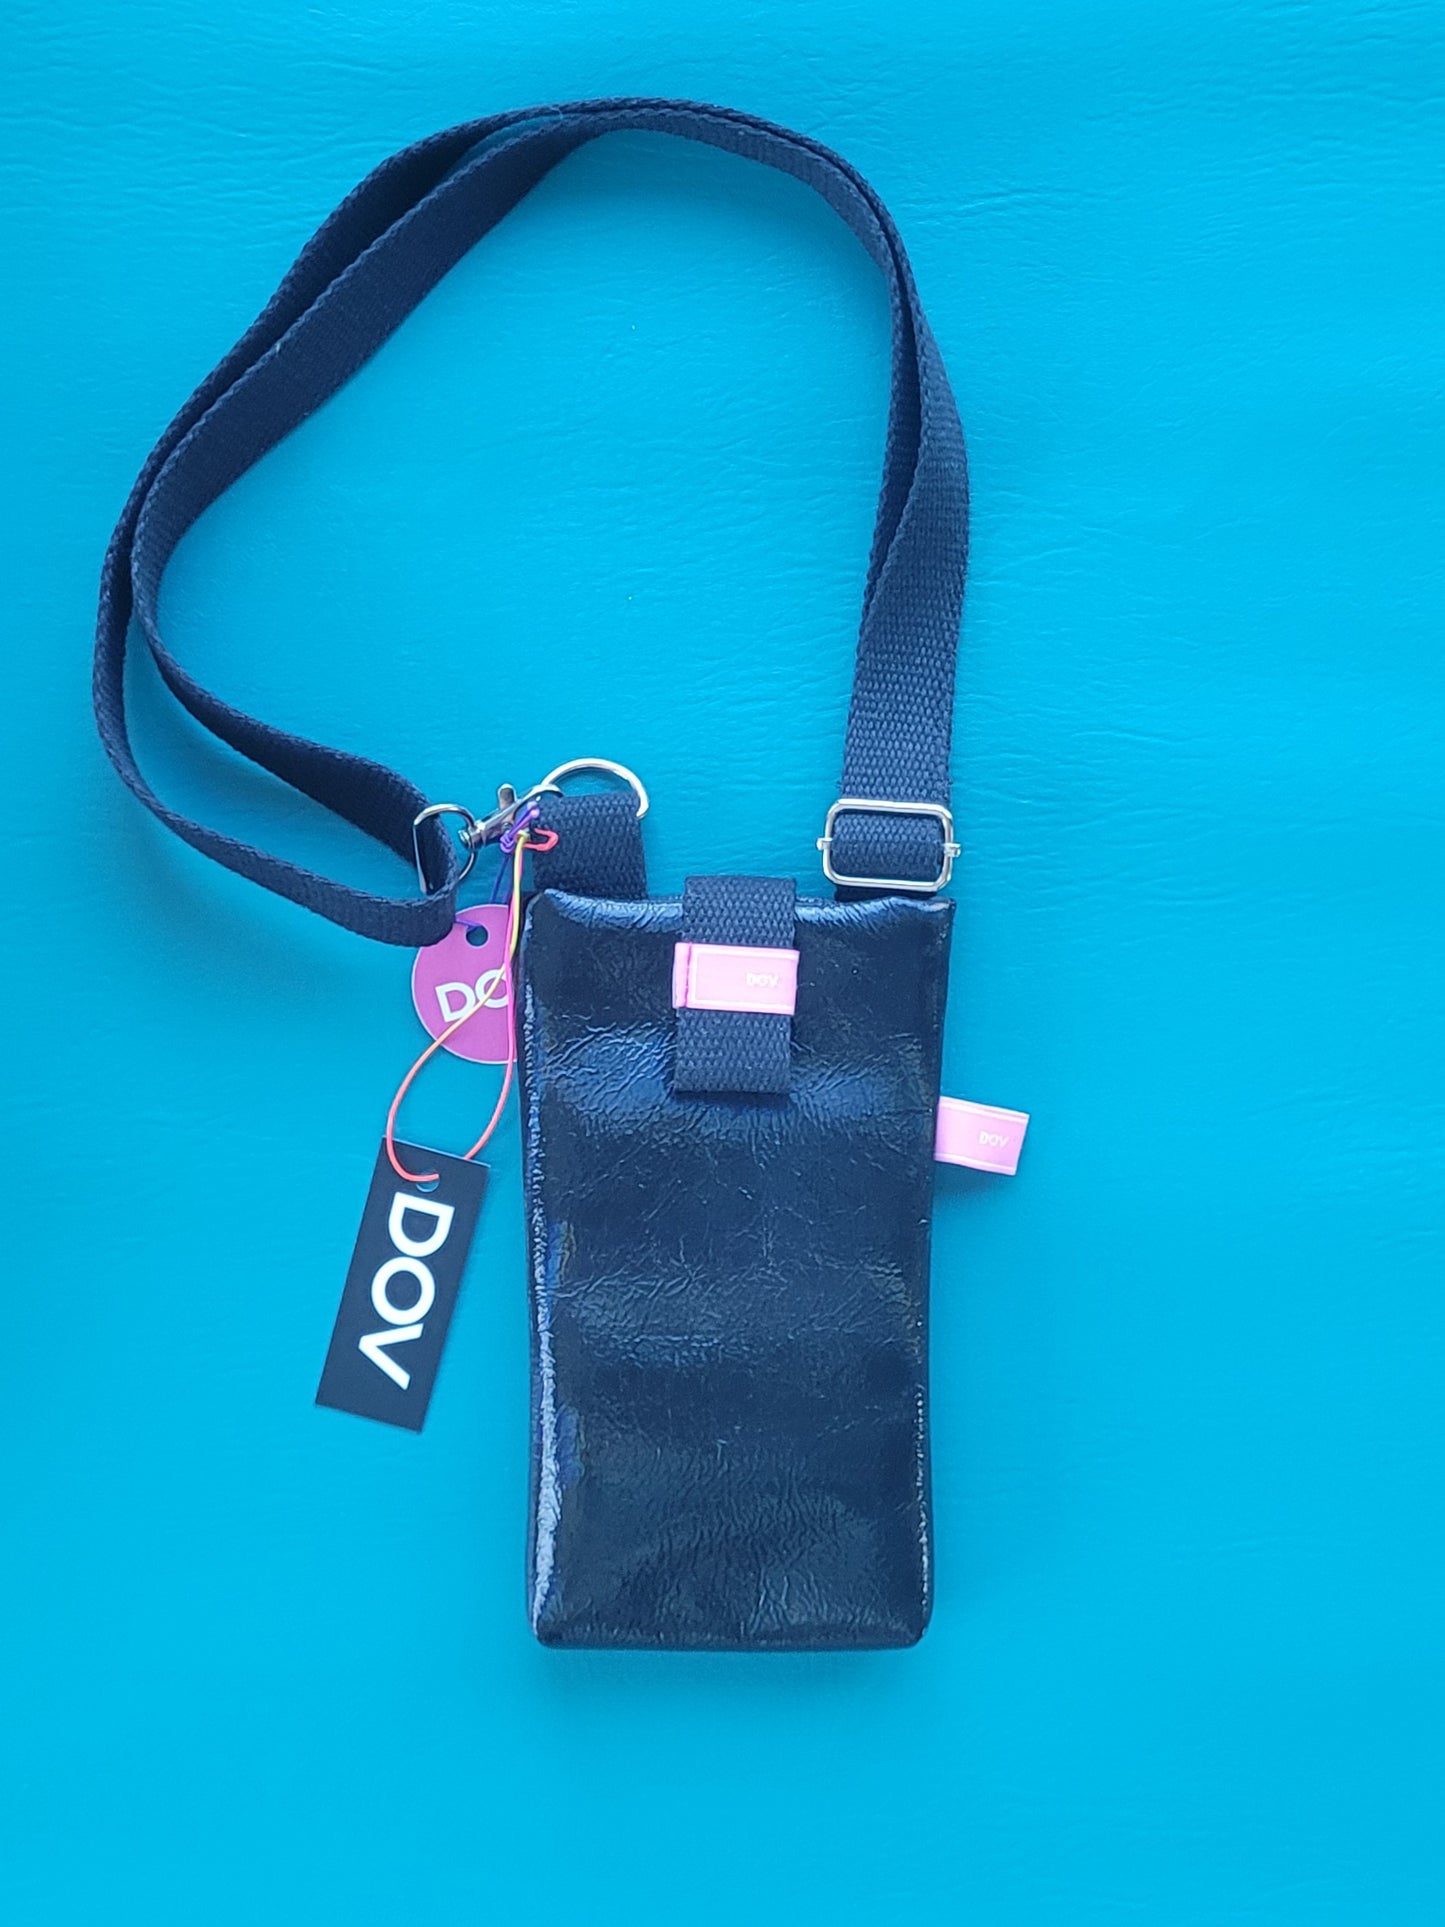 Where is my phone? Black Holographic Bag